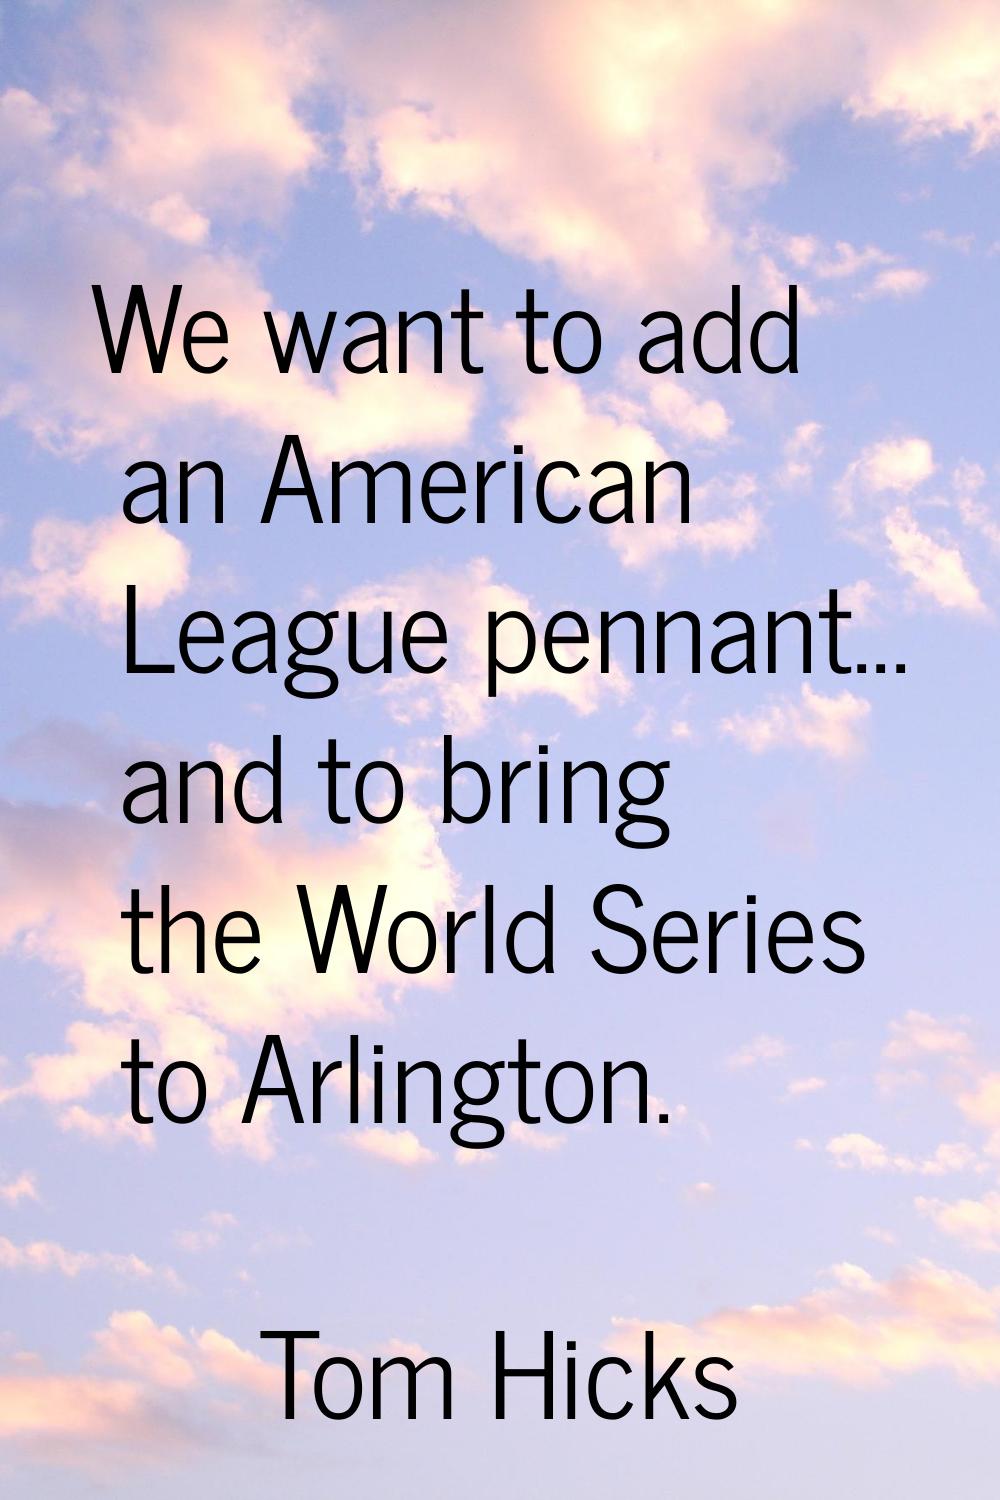 We want to add an American League pennant... and to bring the World Series to Arlington.